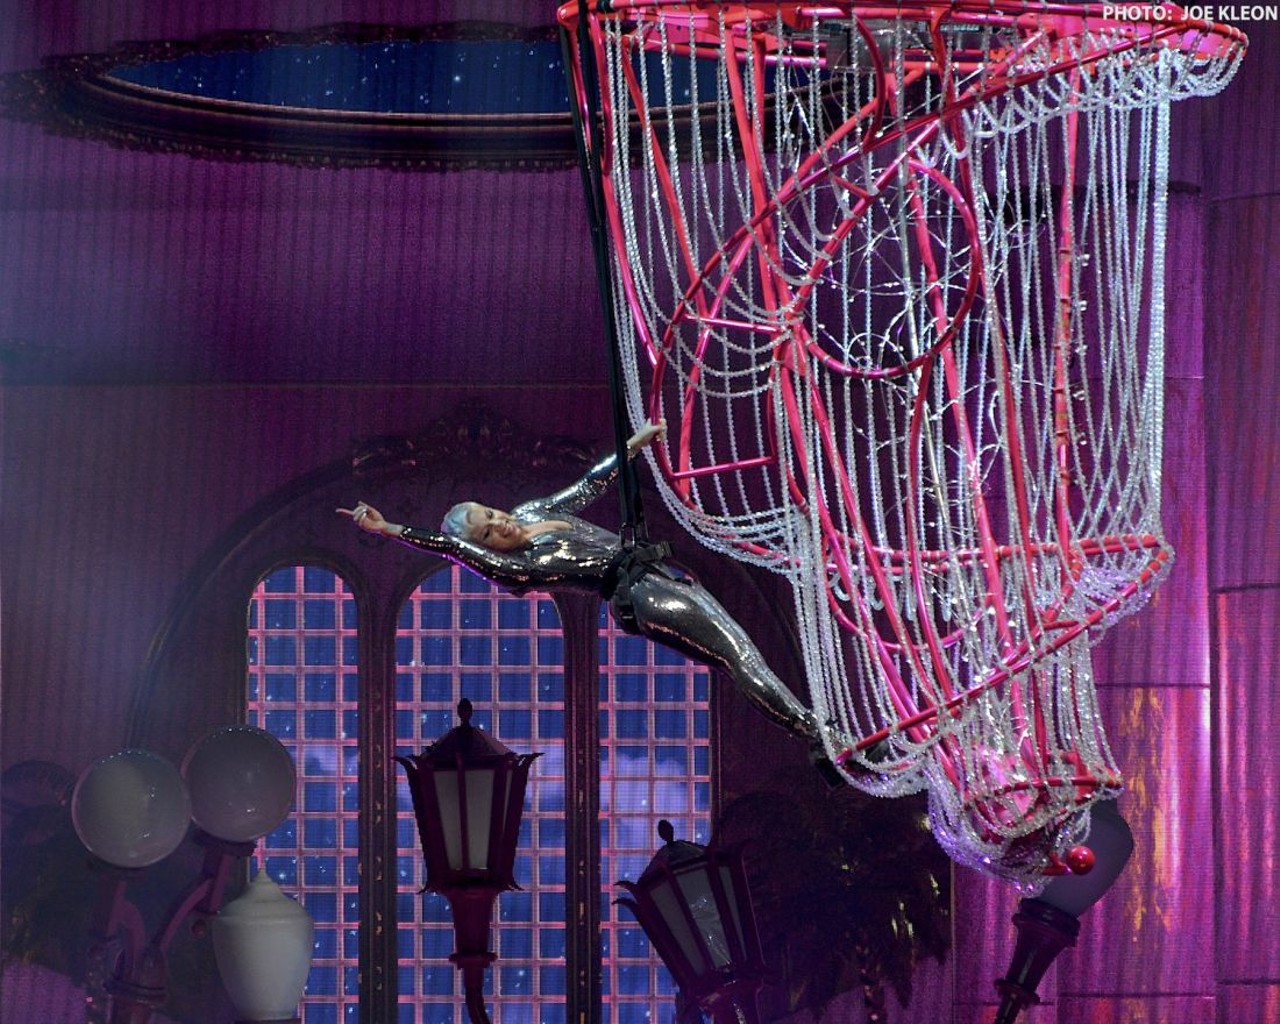 P!nk Performing at Quicken Loans Arena